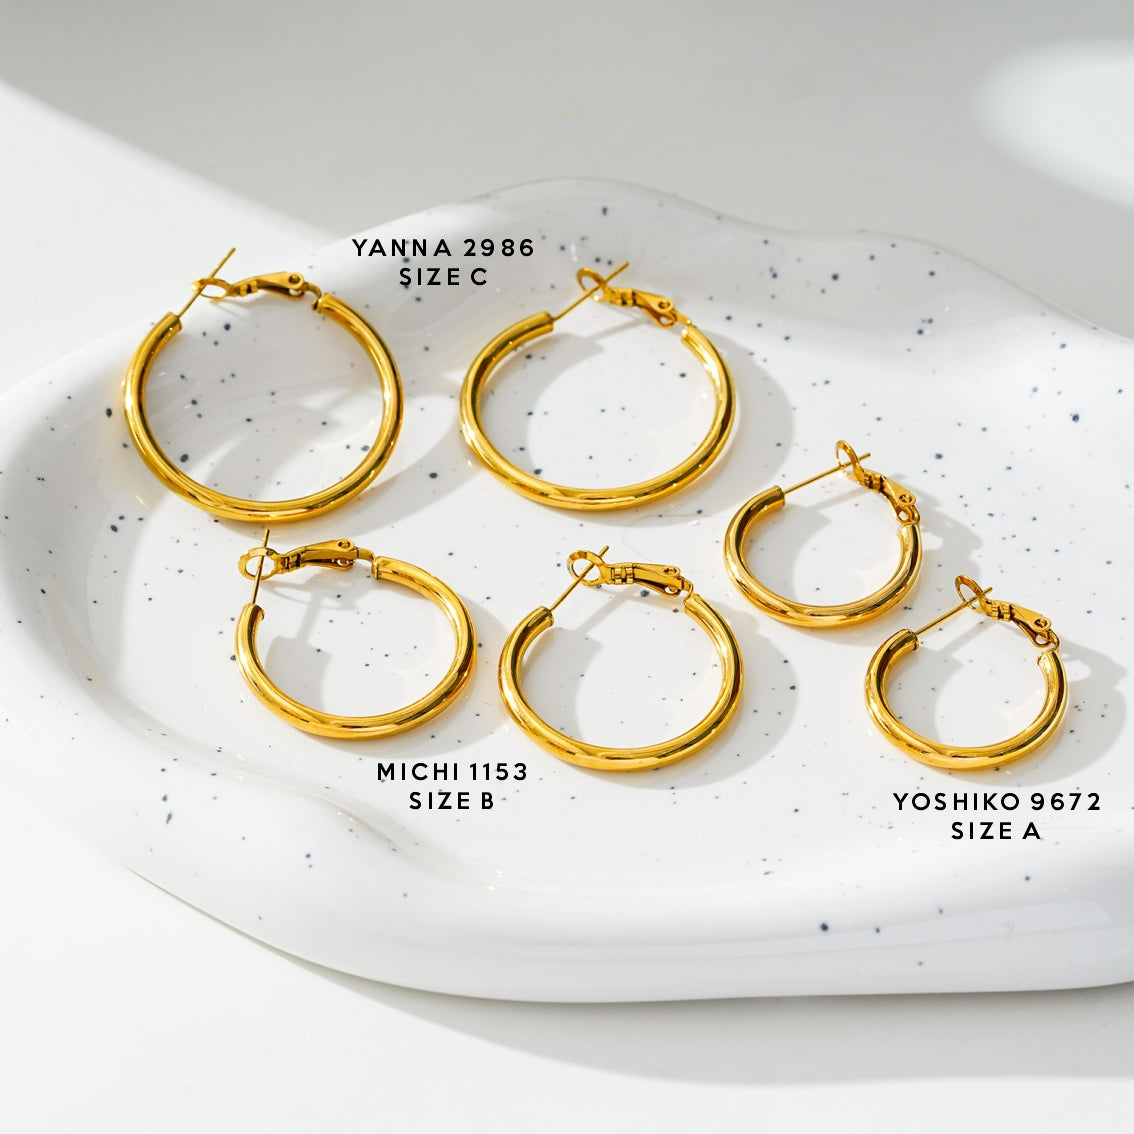 Style YOSHIKO 9672: Mid-Width Essential Hoop Earrings Gold Size A (2 cm)